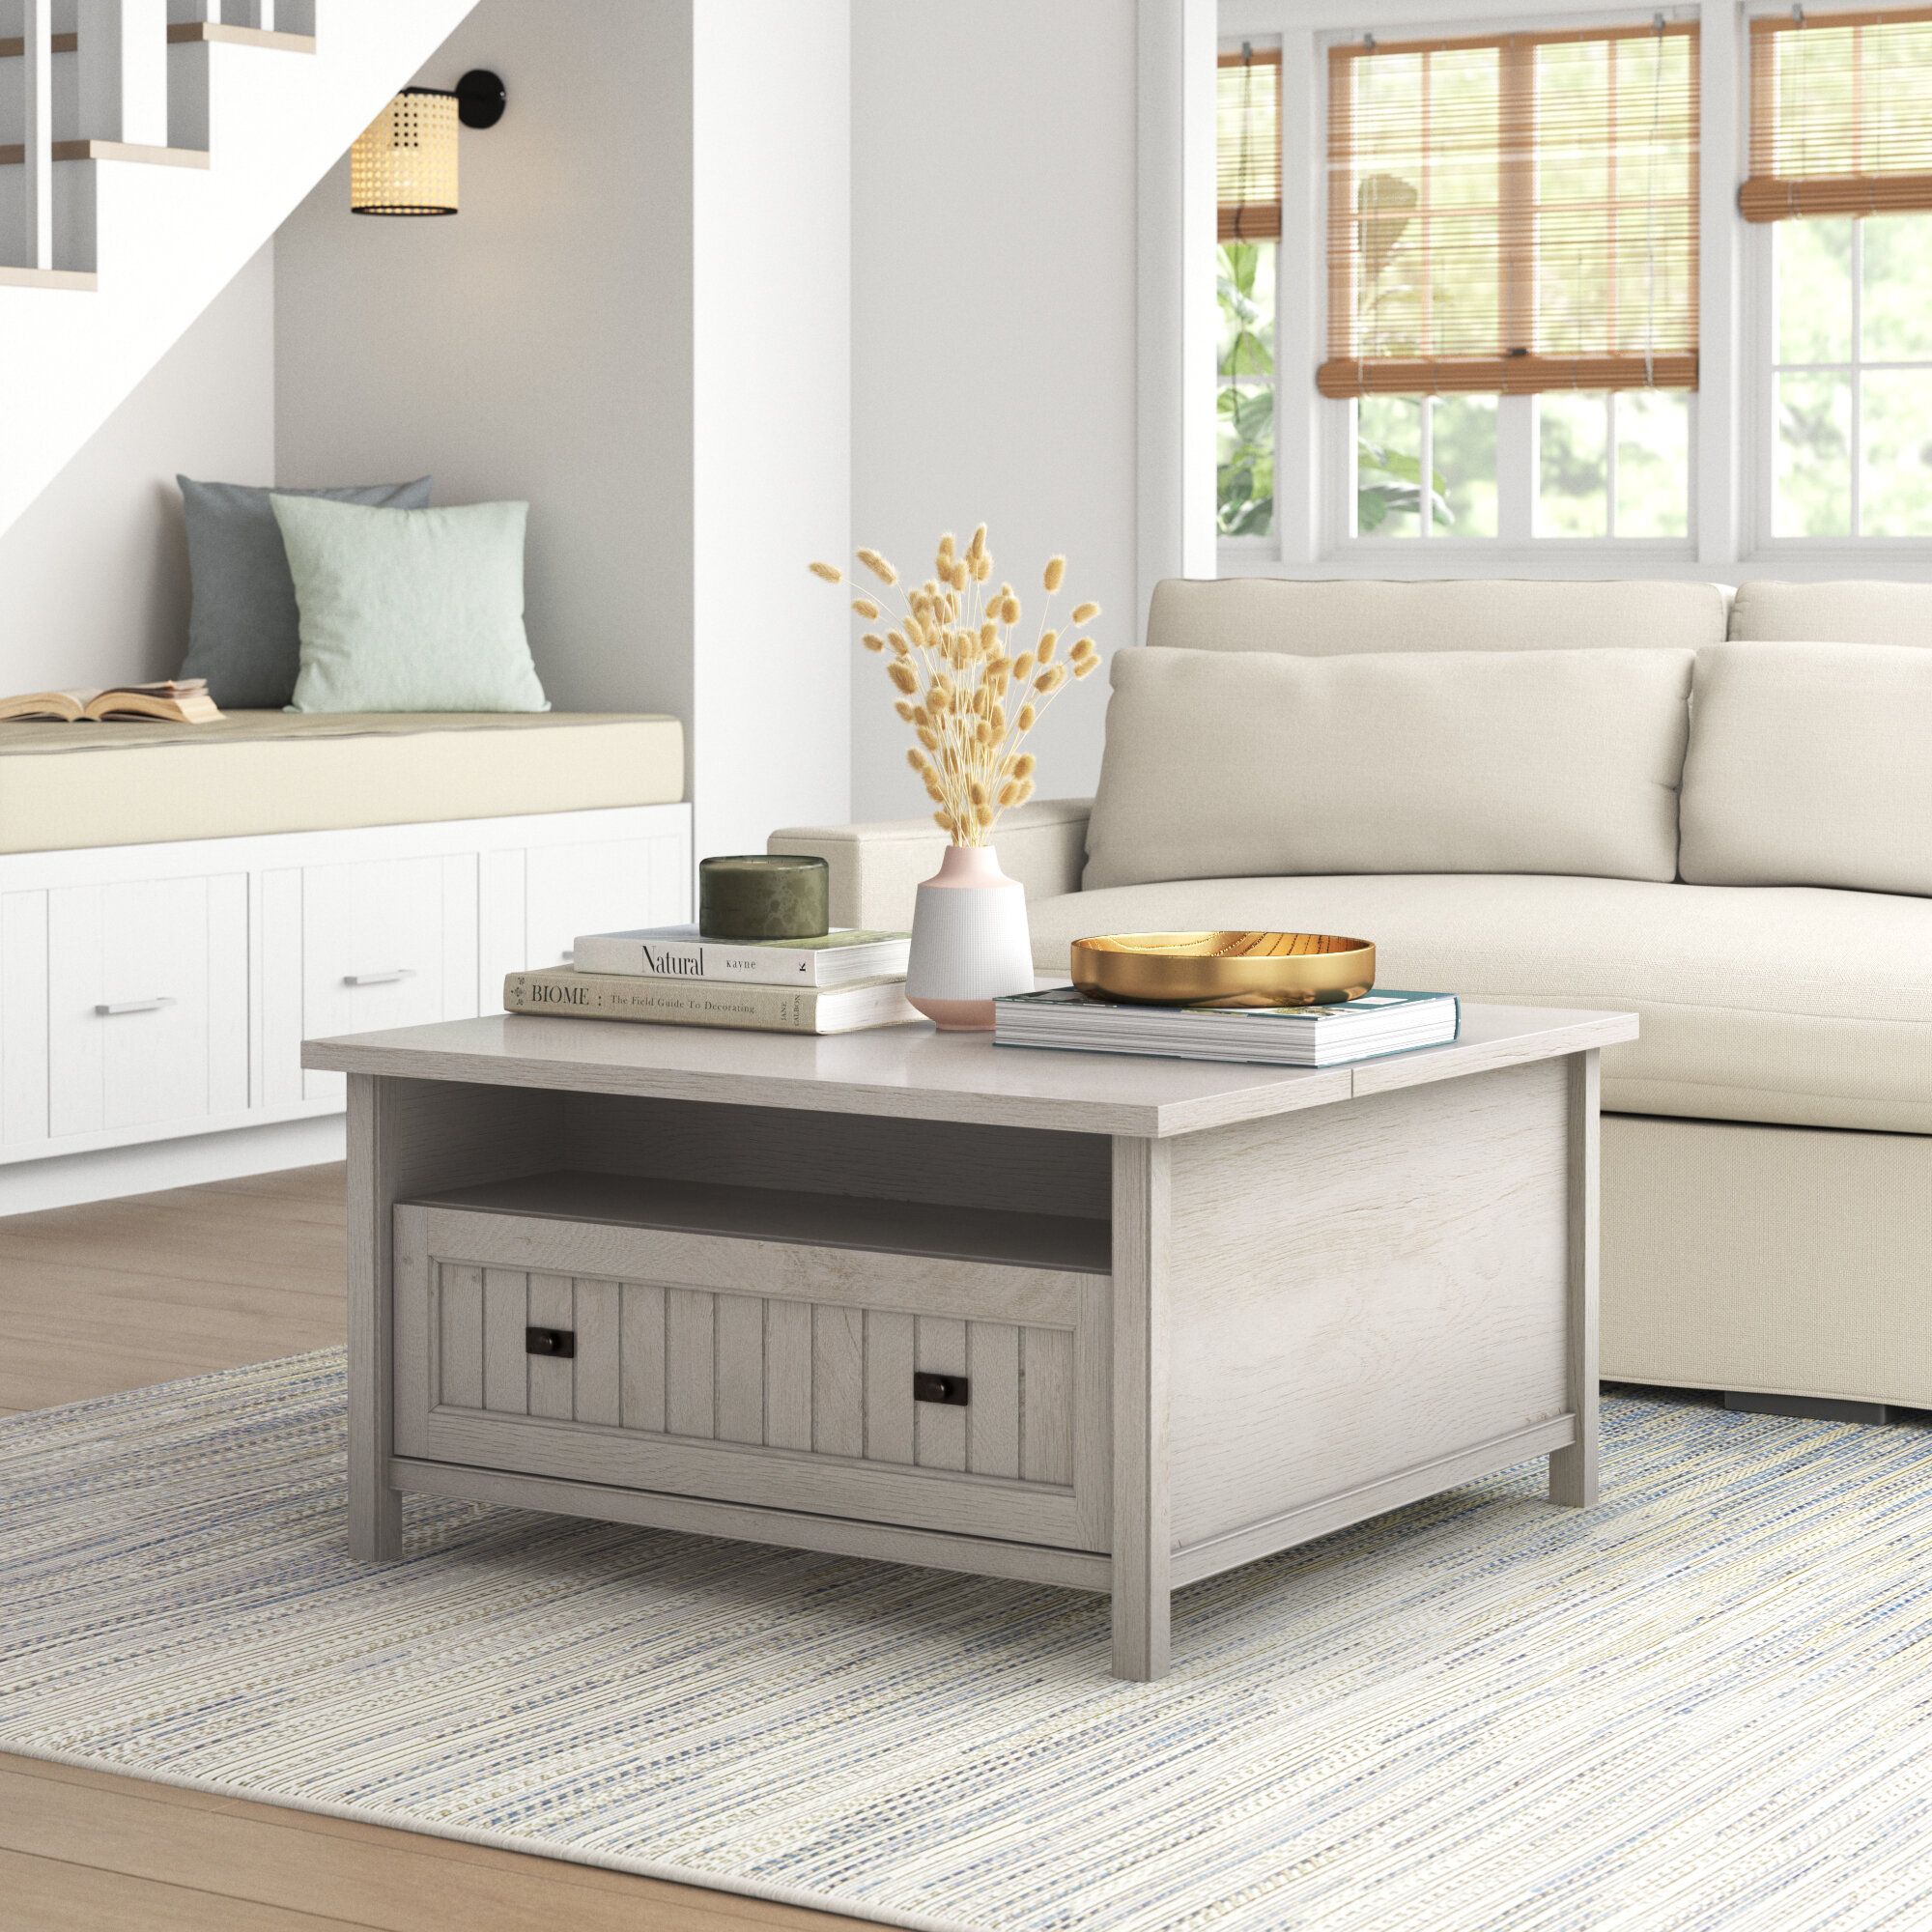 Sand & Stable Karlee Coffee Table & Reviews | Wayfair Intended For Lift Top Coffee Tables With Storage Drawers (View 9 of 15)